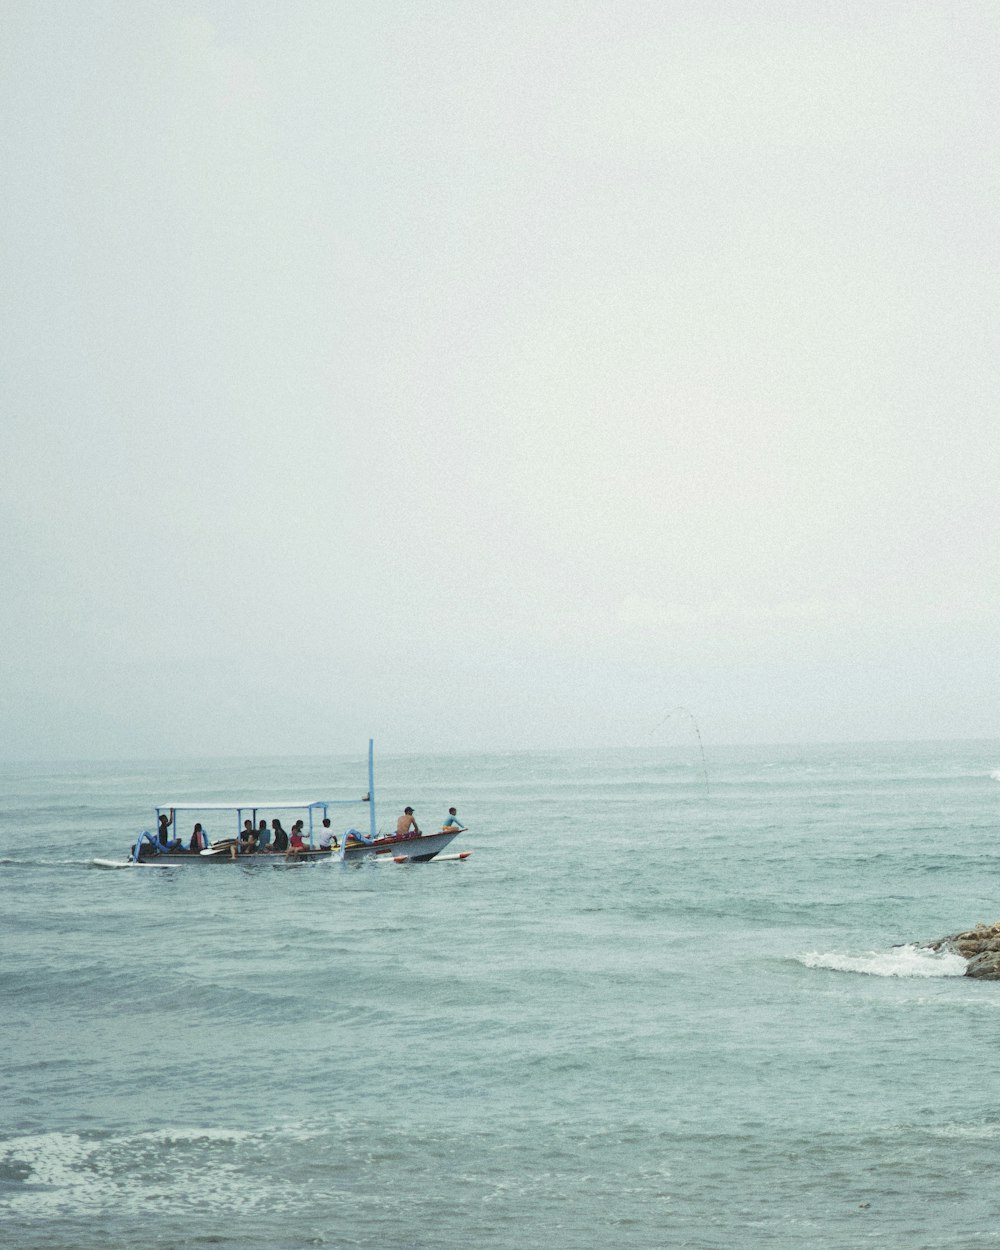 a group of people on a boat in the ocean